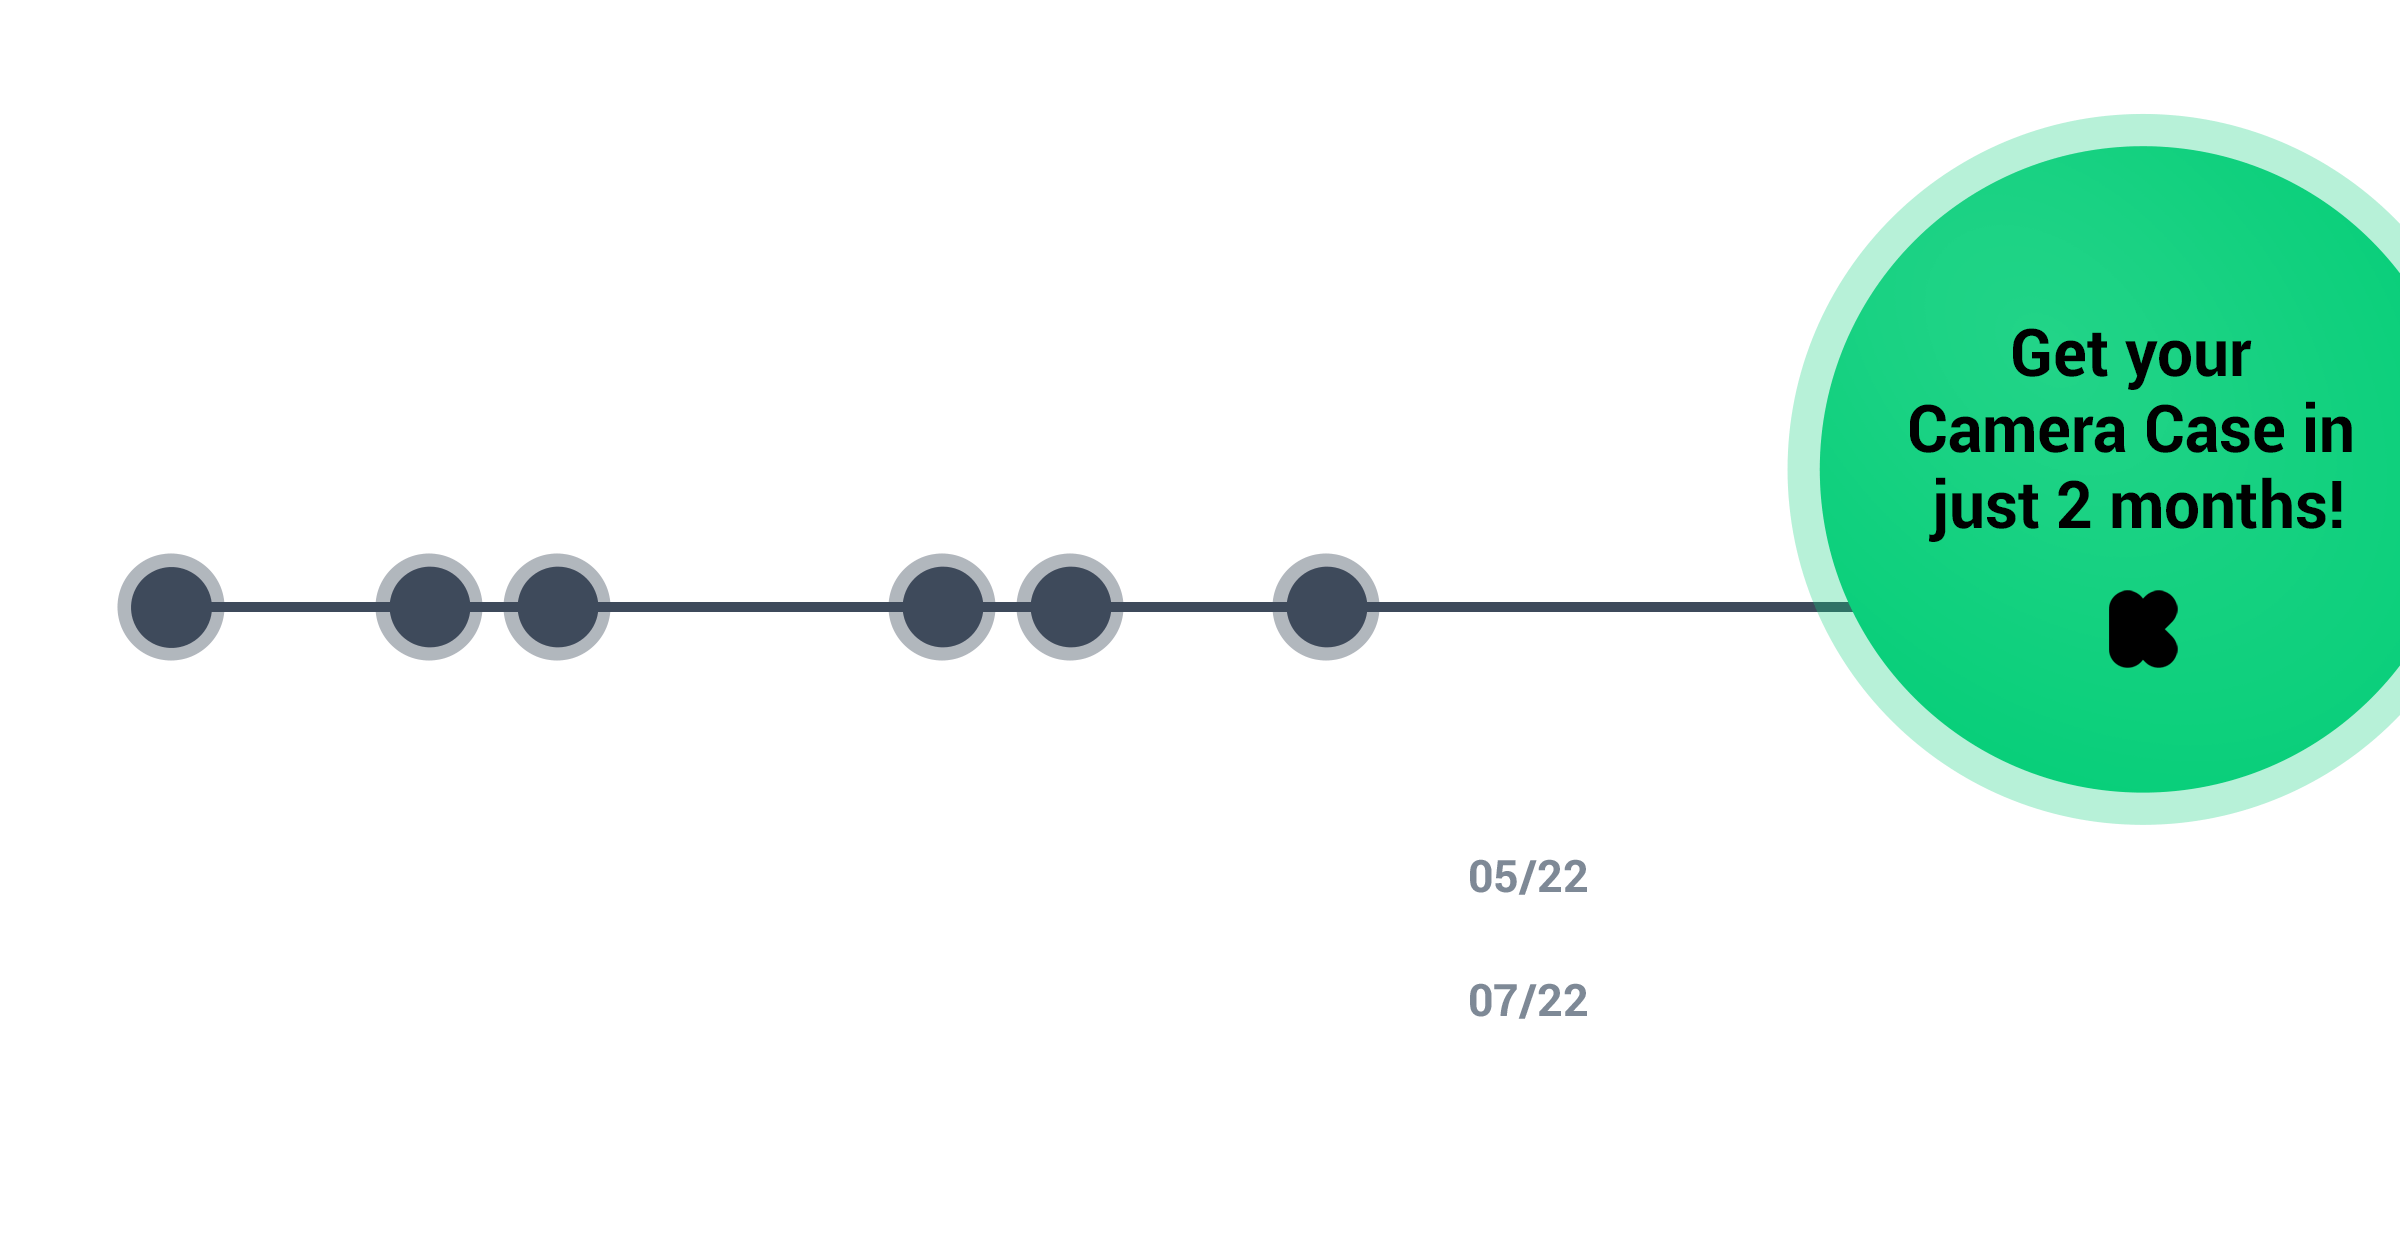 Timeline of the 10 year Pull Up Case history